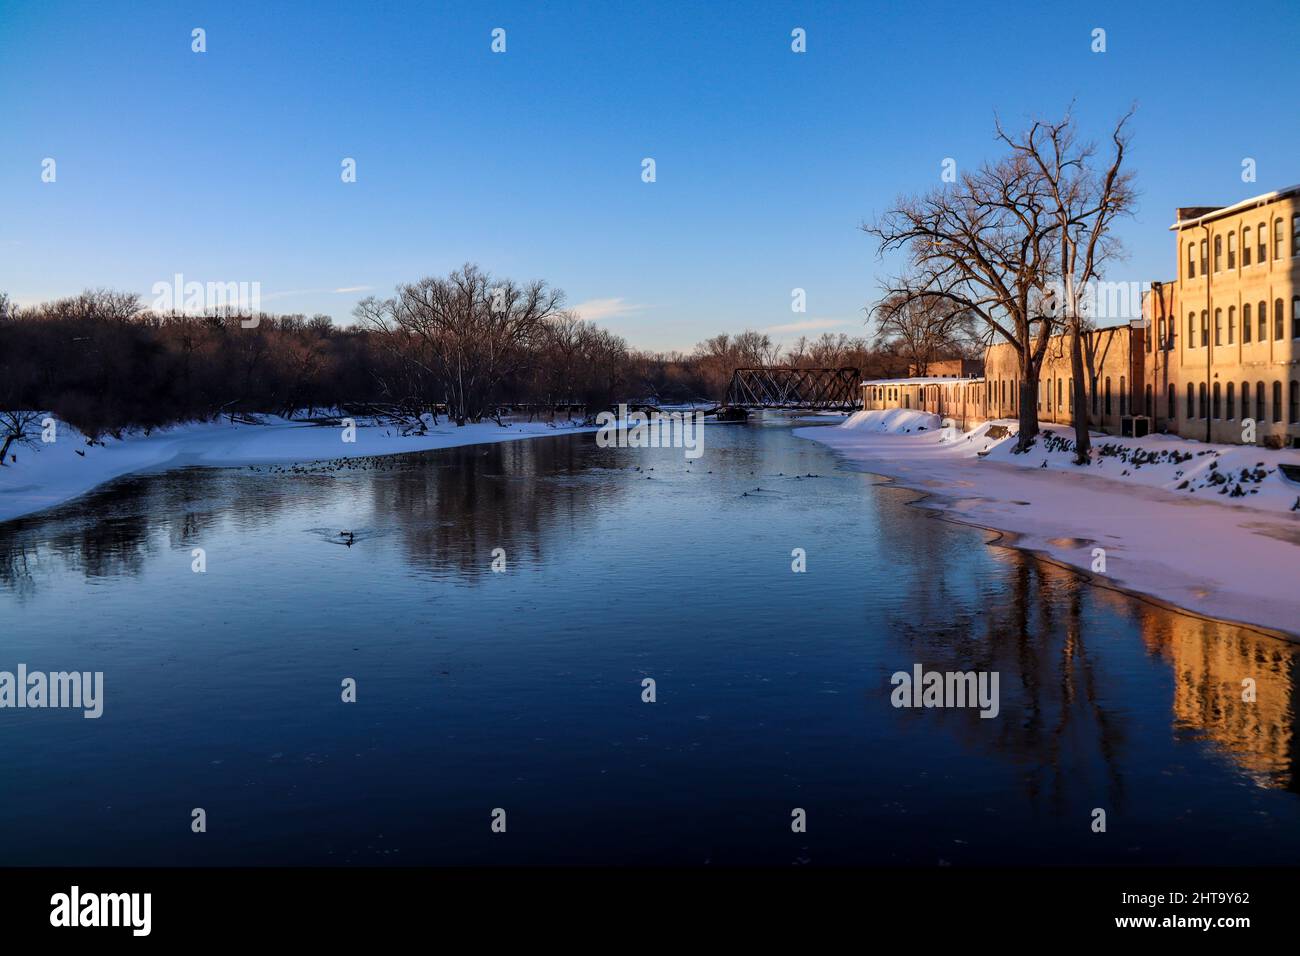 Panoramic view of a river flowing through an urban area on a sunny winter day Stock Photo